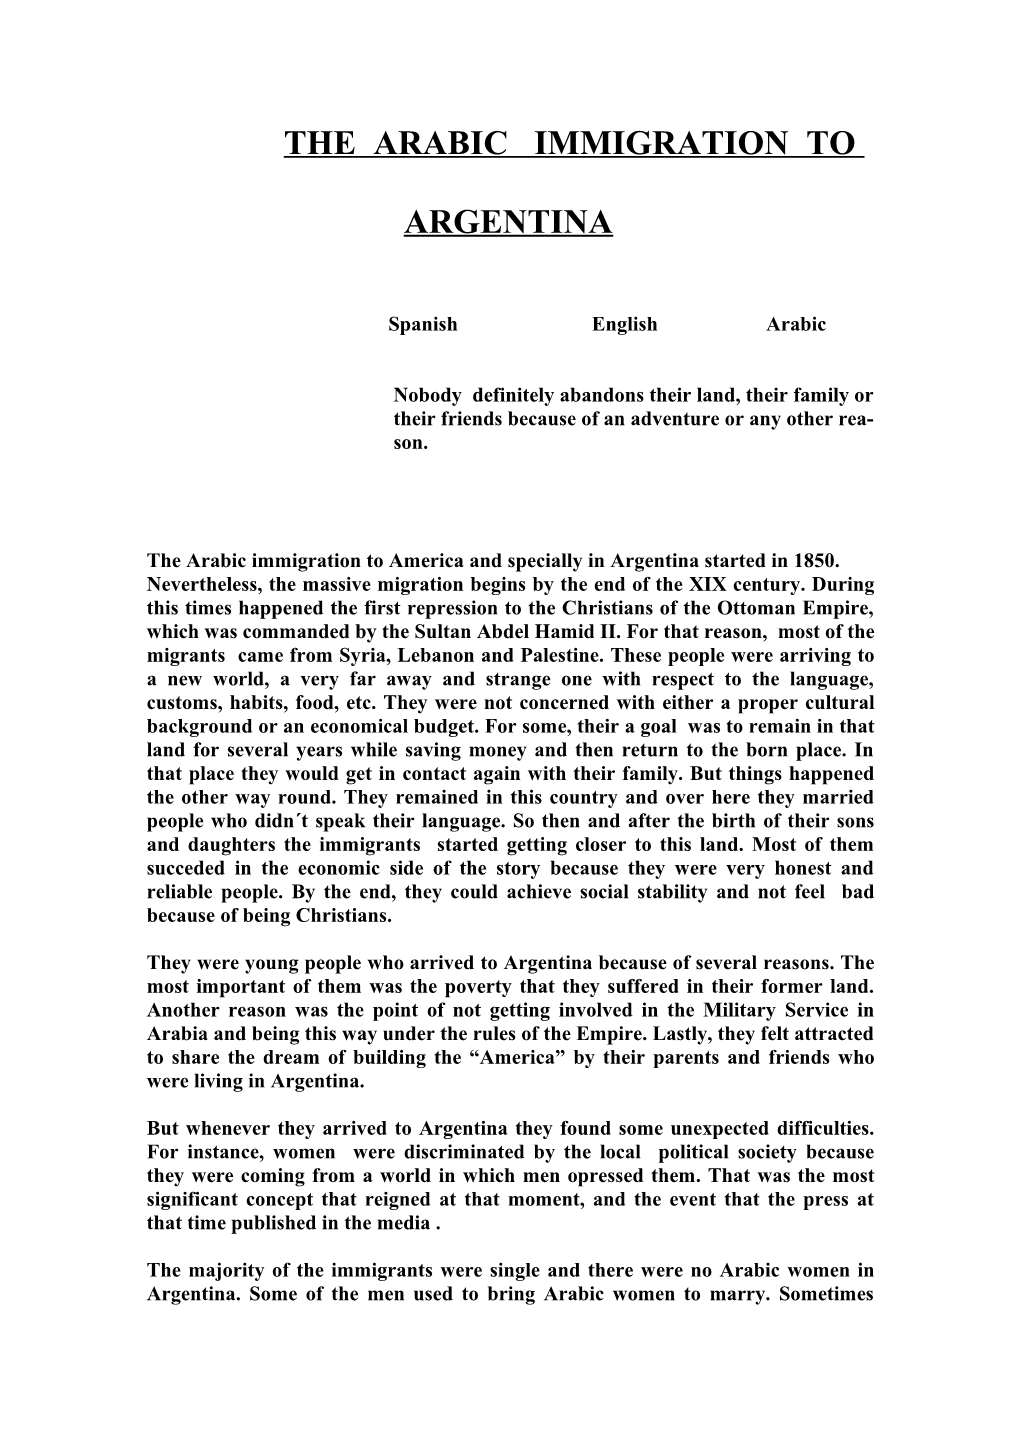 The Arabic Immigration in Argentina